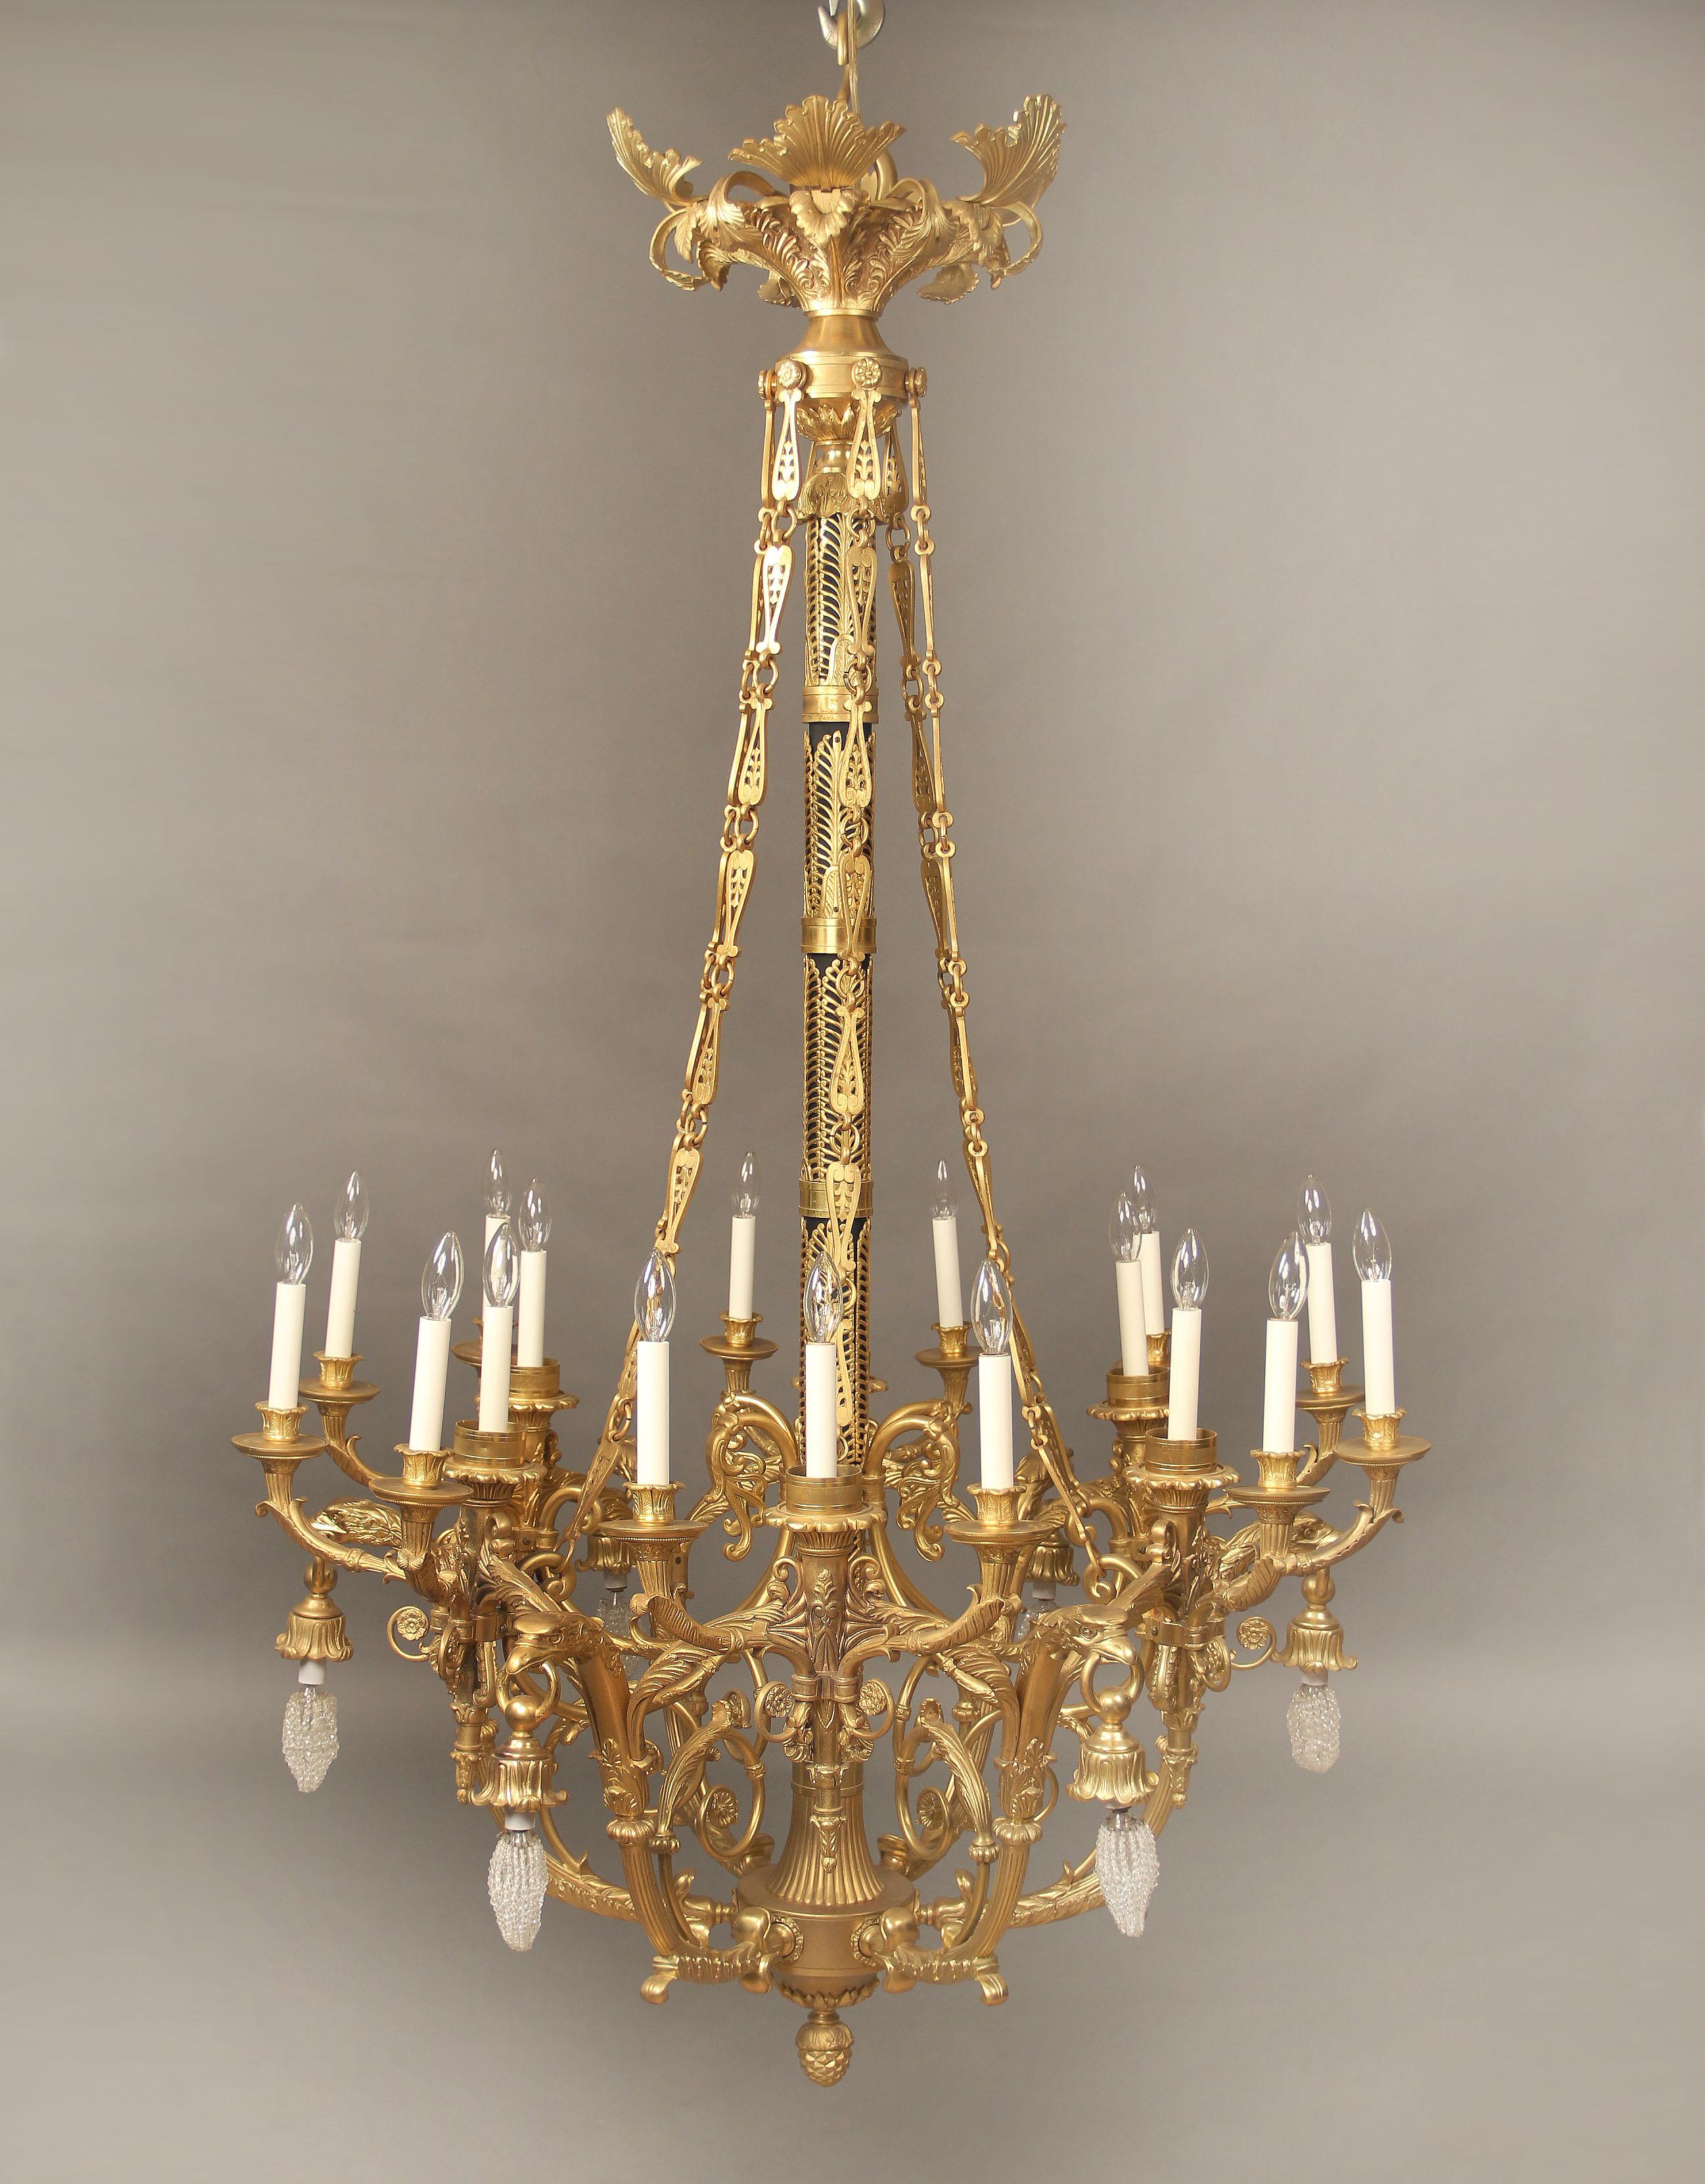 A large and important early 20th century gilt bronze twenty four light empire style chandelier.

The wonderful casted all bronze frame decorated with empire designs, with bronze chains from the crown to the body, the arms consisting of torches and